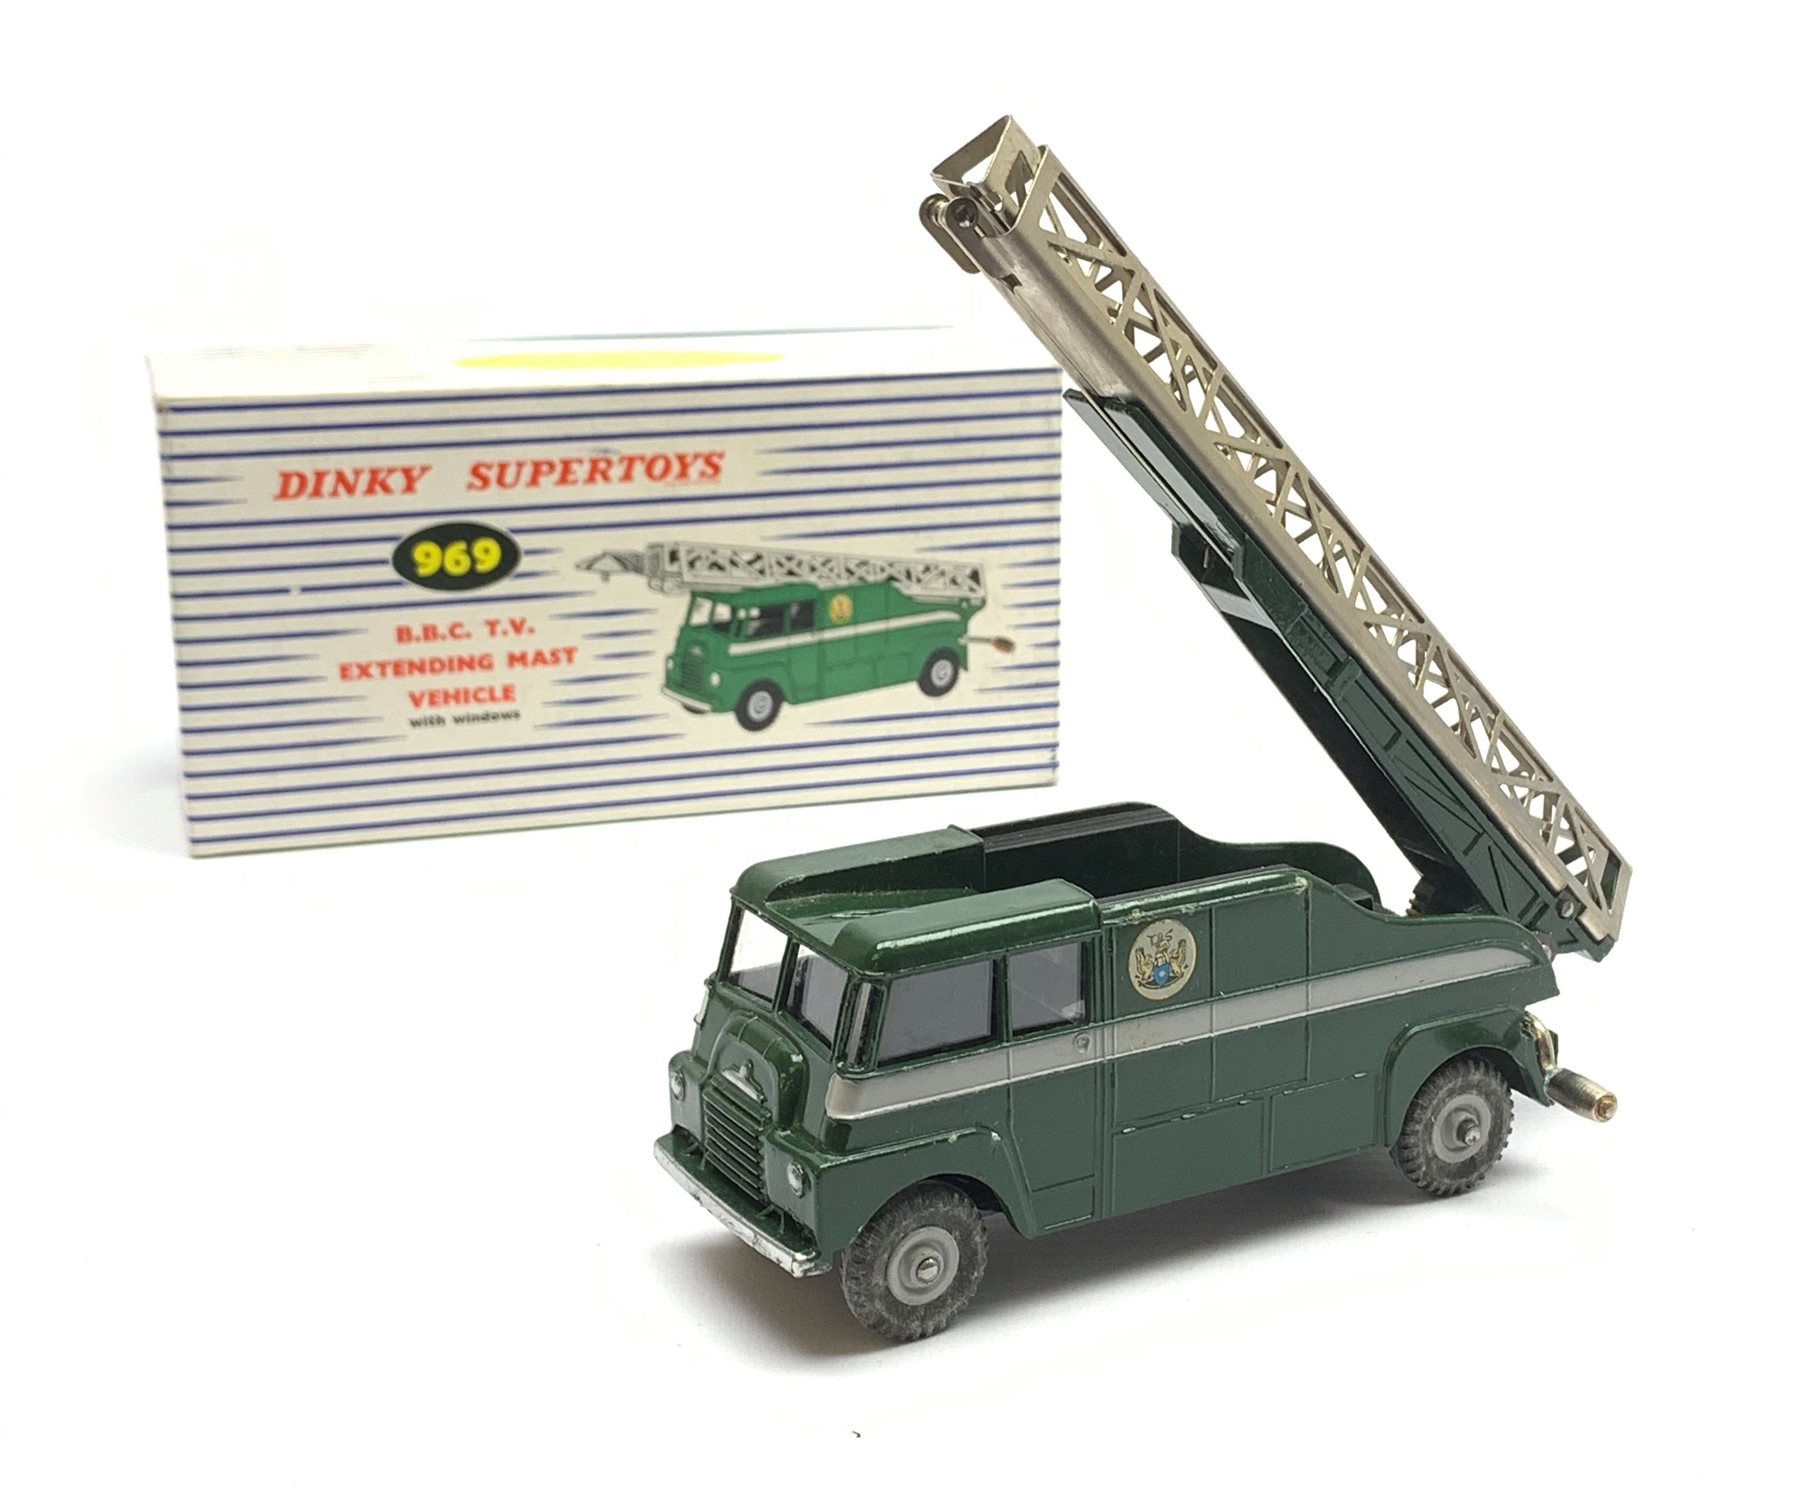 Dinky - Supertoys B.B.C. T.V. Extending Mast Vehicle, No.969, boxed with internal packaging and ins - Image 2 of 8